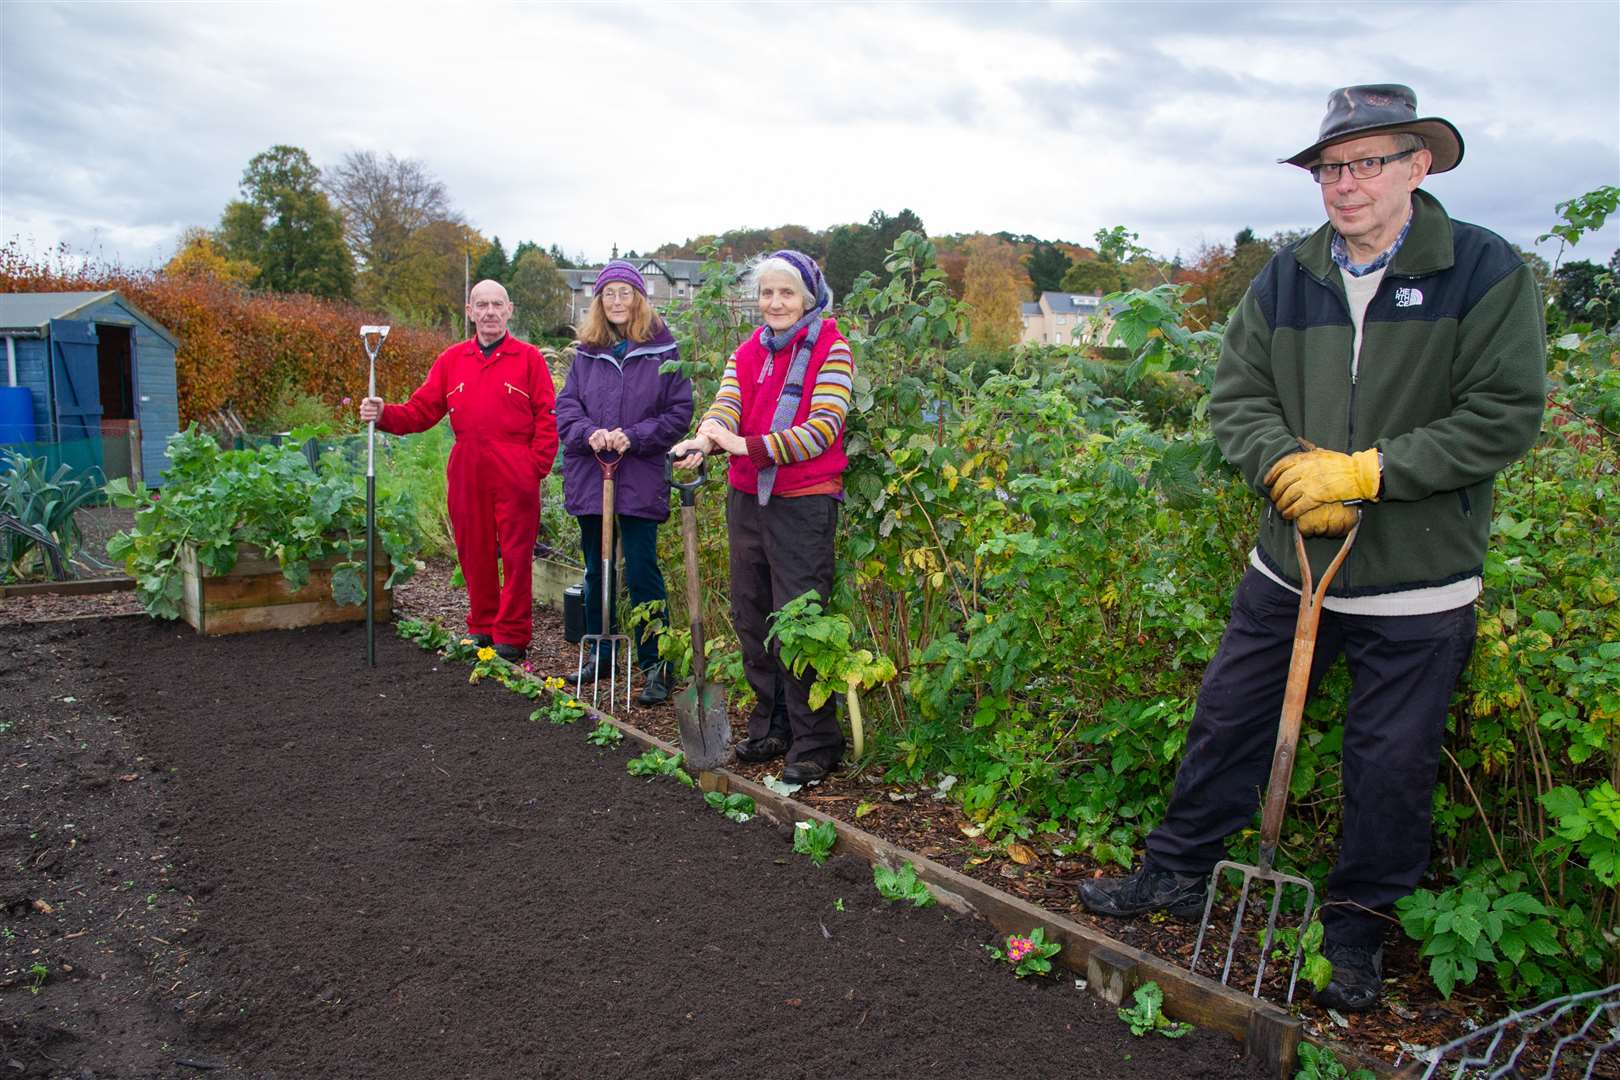 Steve Ferris (right) is joined by Billy Hardie, Joanna Legard and Daphne Francis at the Forres Community Gardens. Picture: Daniel Forsyth.